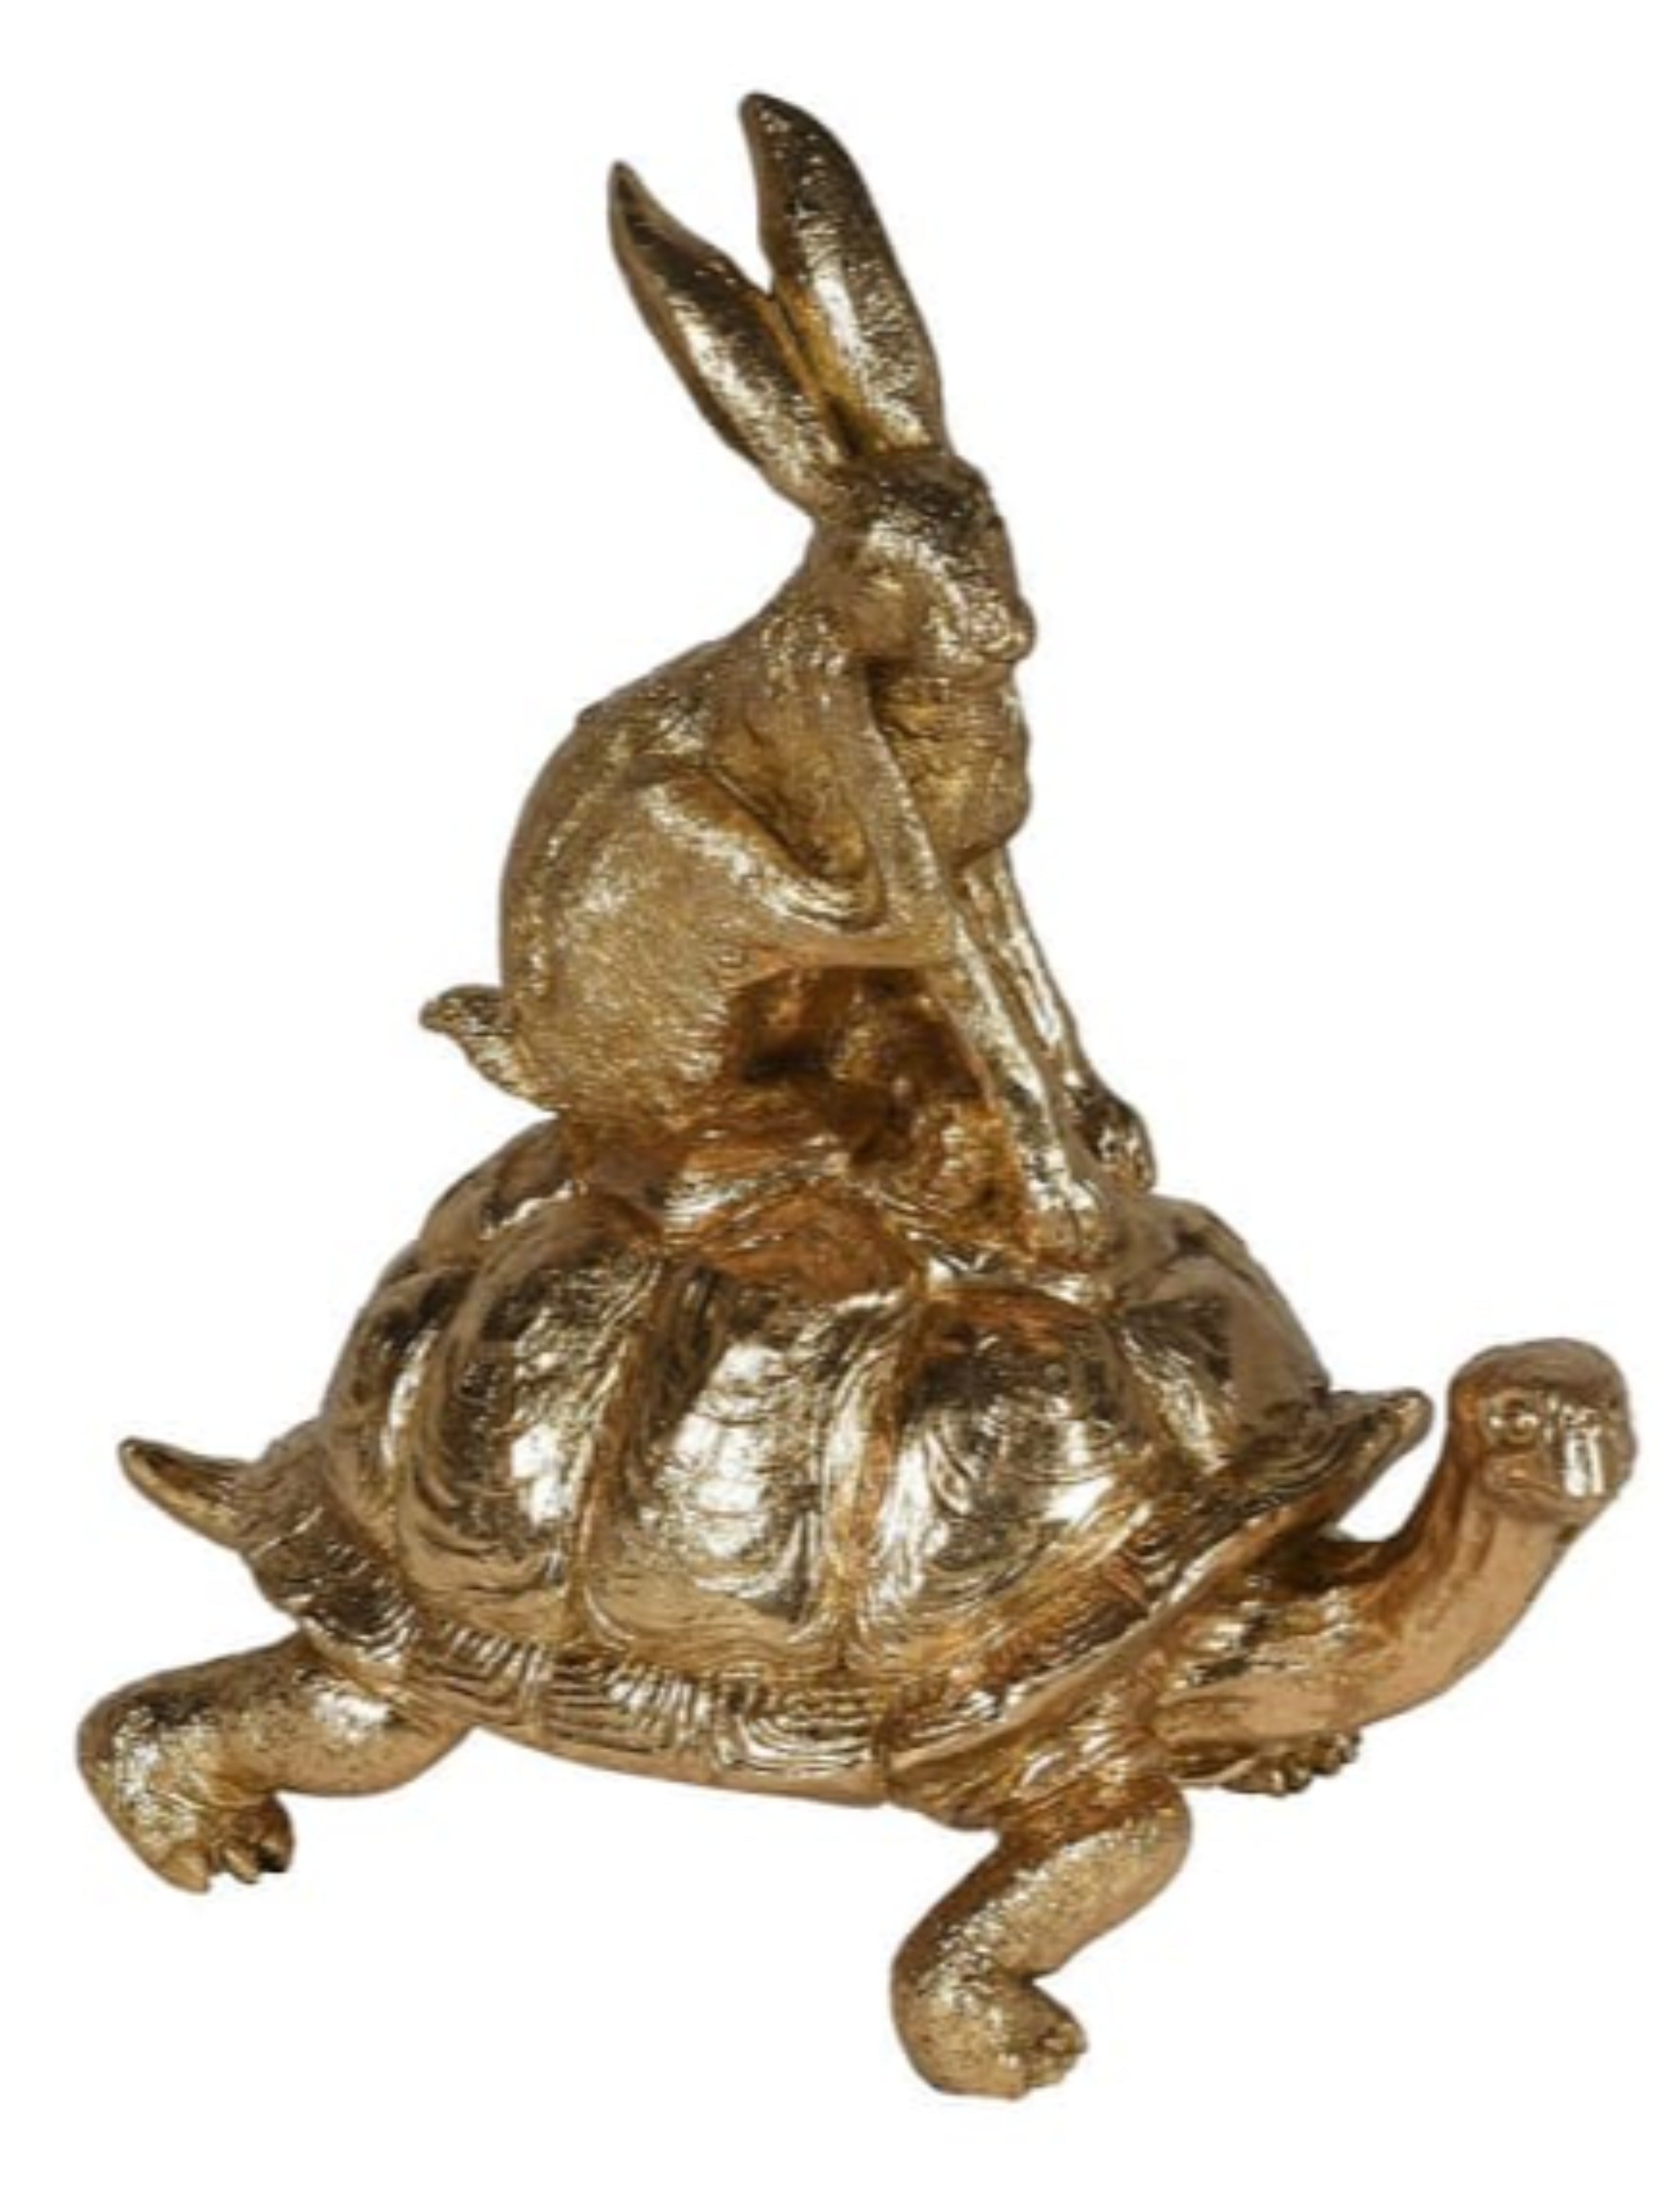 Golden Hare and Tortoise Ornament